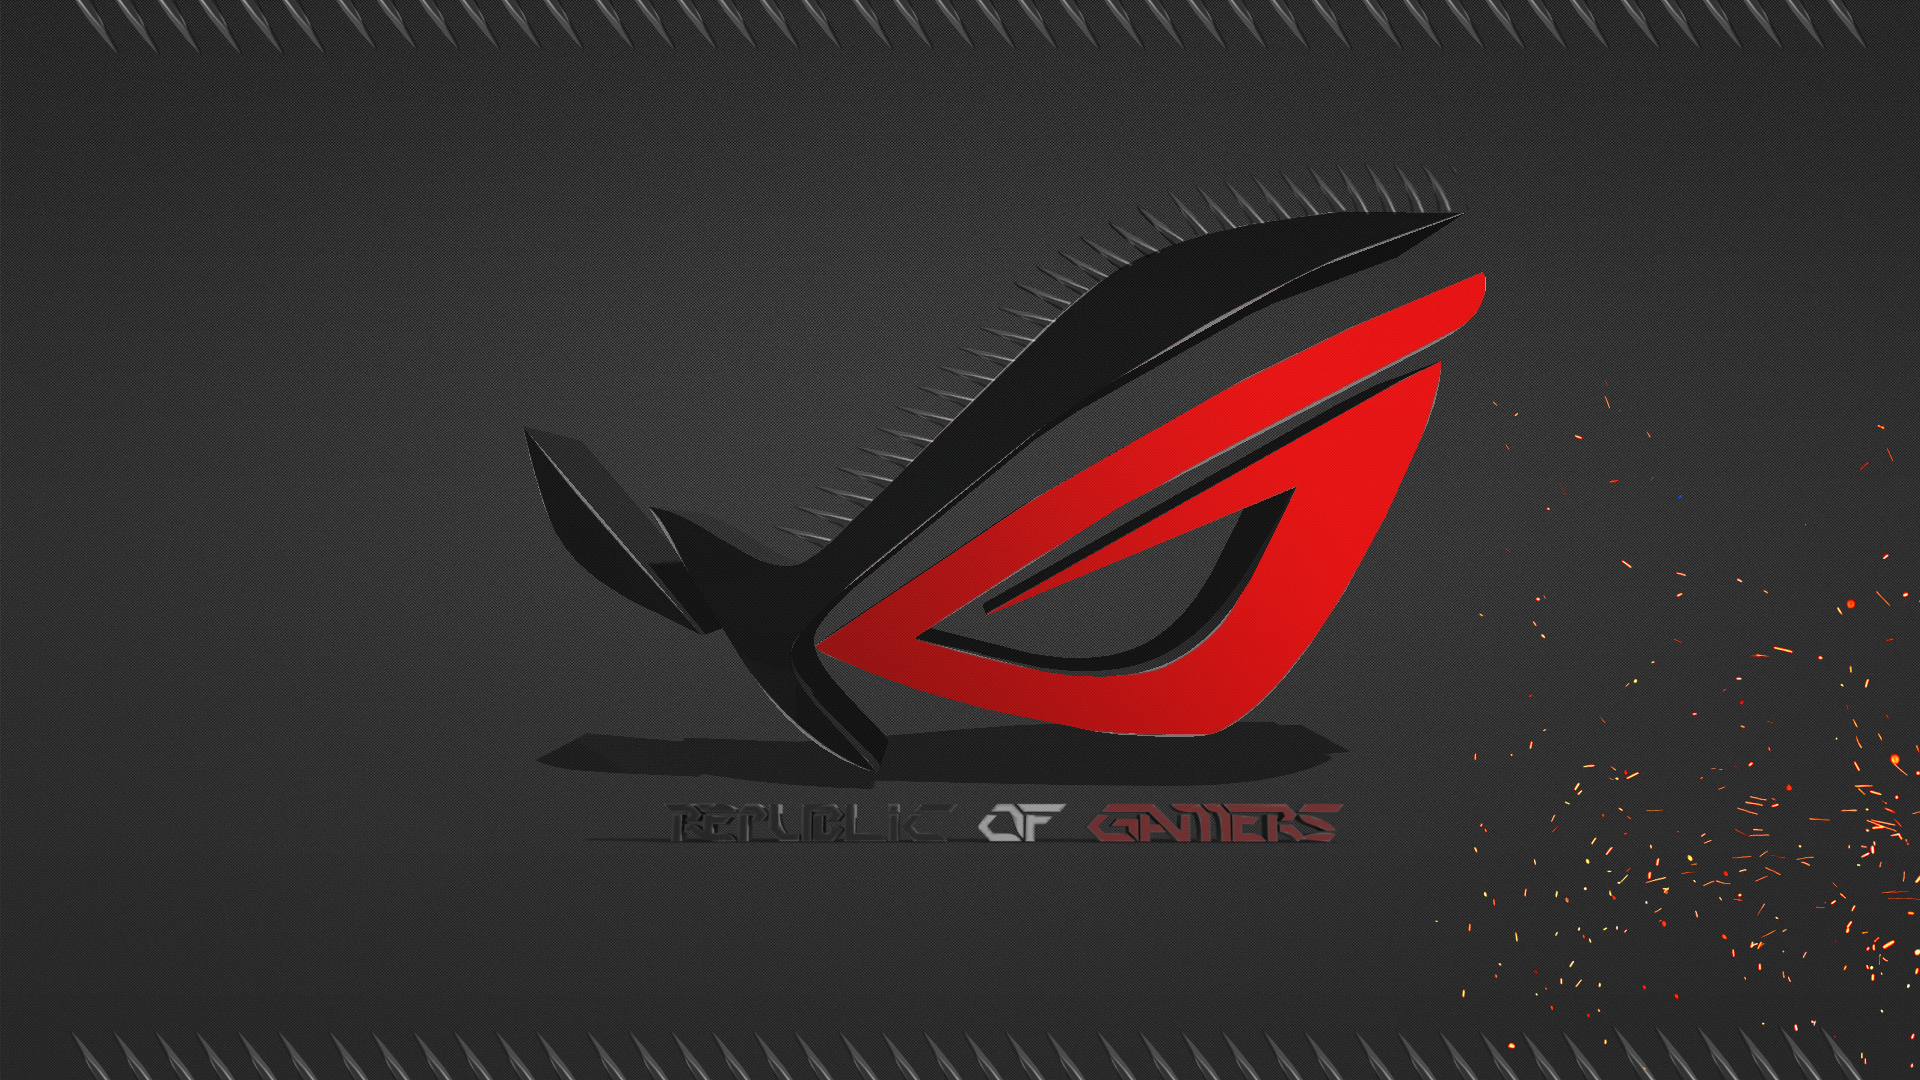 General 1920x1080 Republic of Gamers ASUS spike  CGI logo red black photo manipulation photoshopped PC gaming gray background